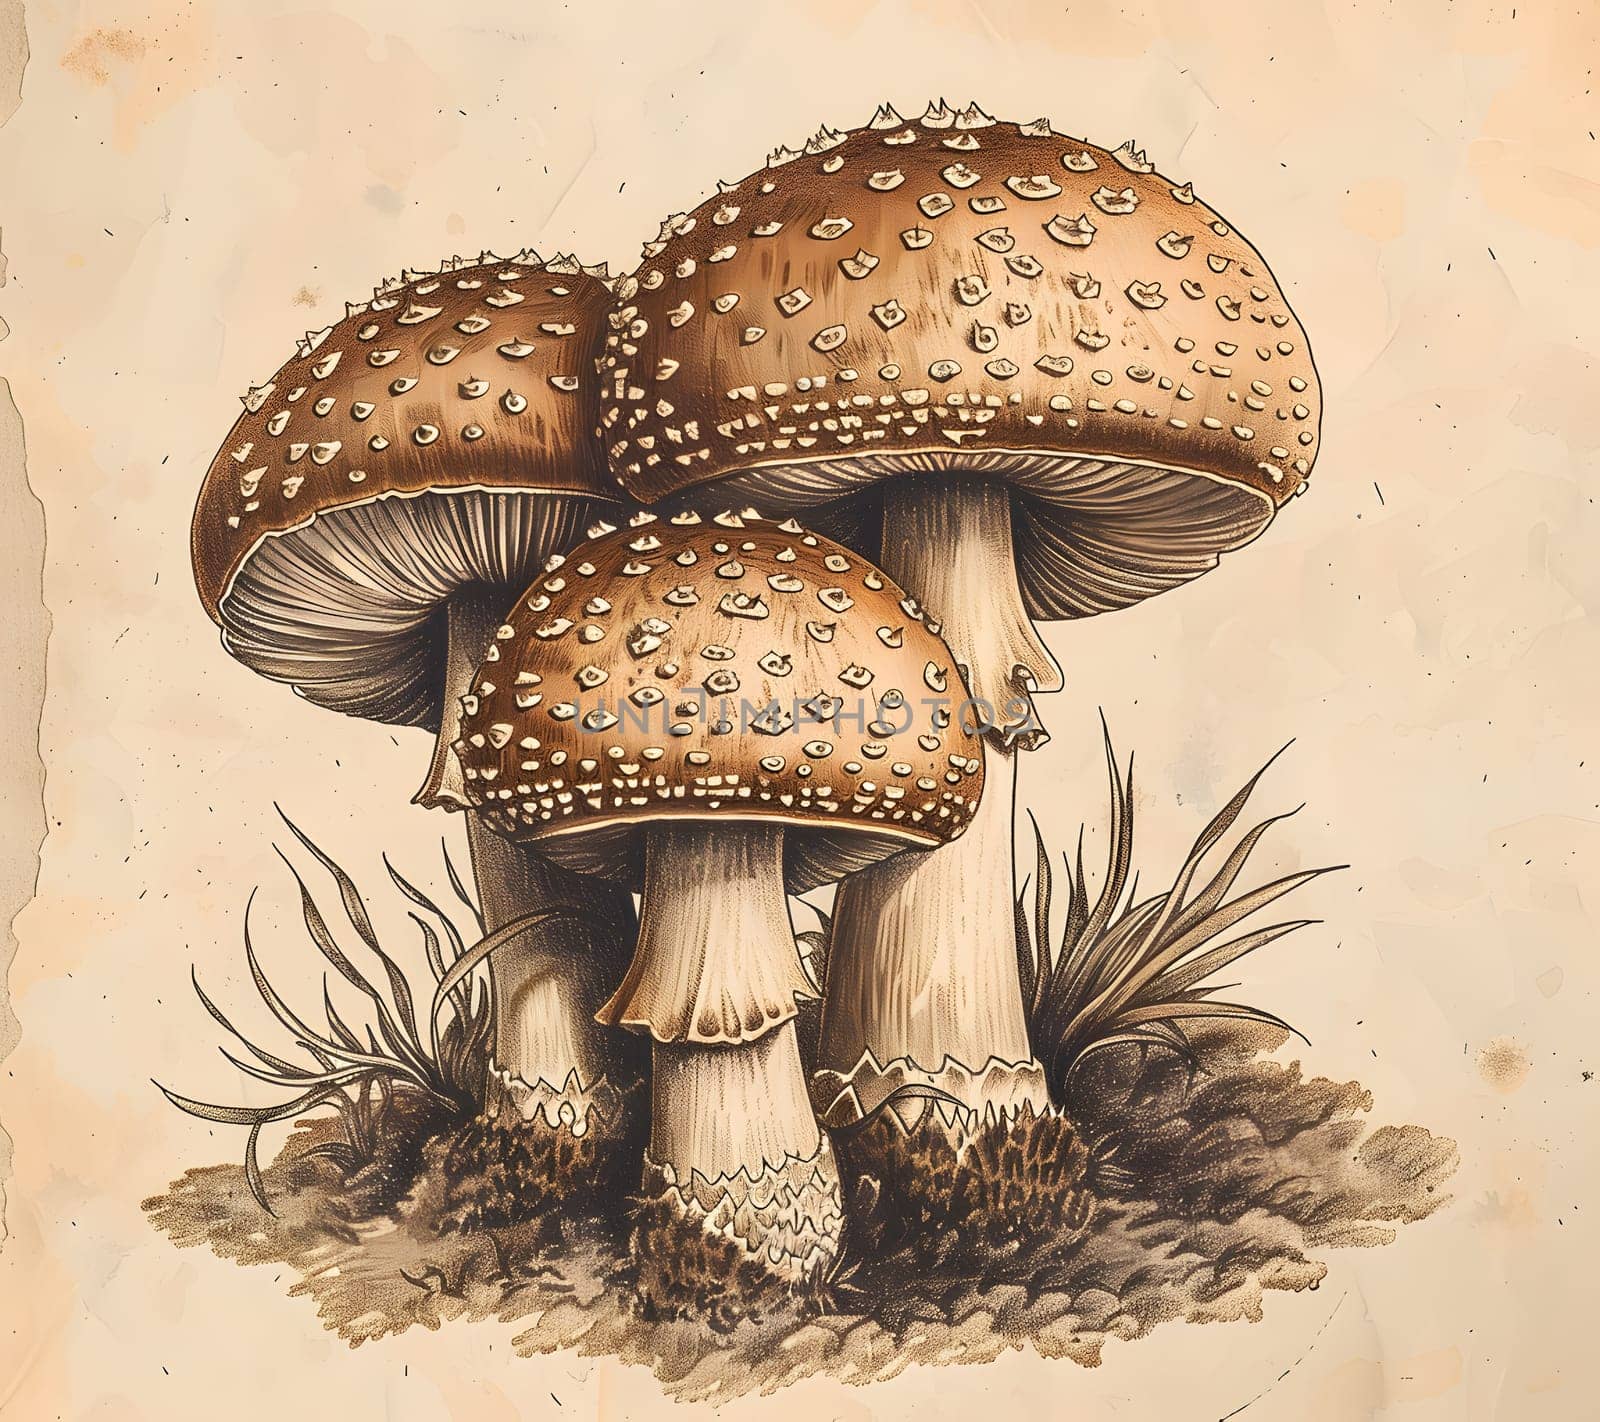 An illustration of three terrestrial mushroom species belonging to the Agaricaceae family, set in a natural landscape. Botany and art come together in this beautiful painting of boletes and agarics